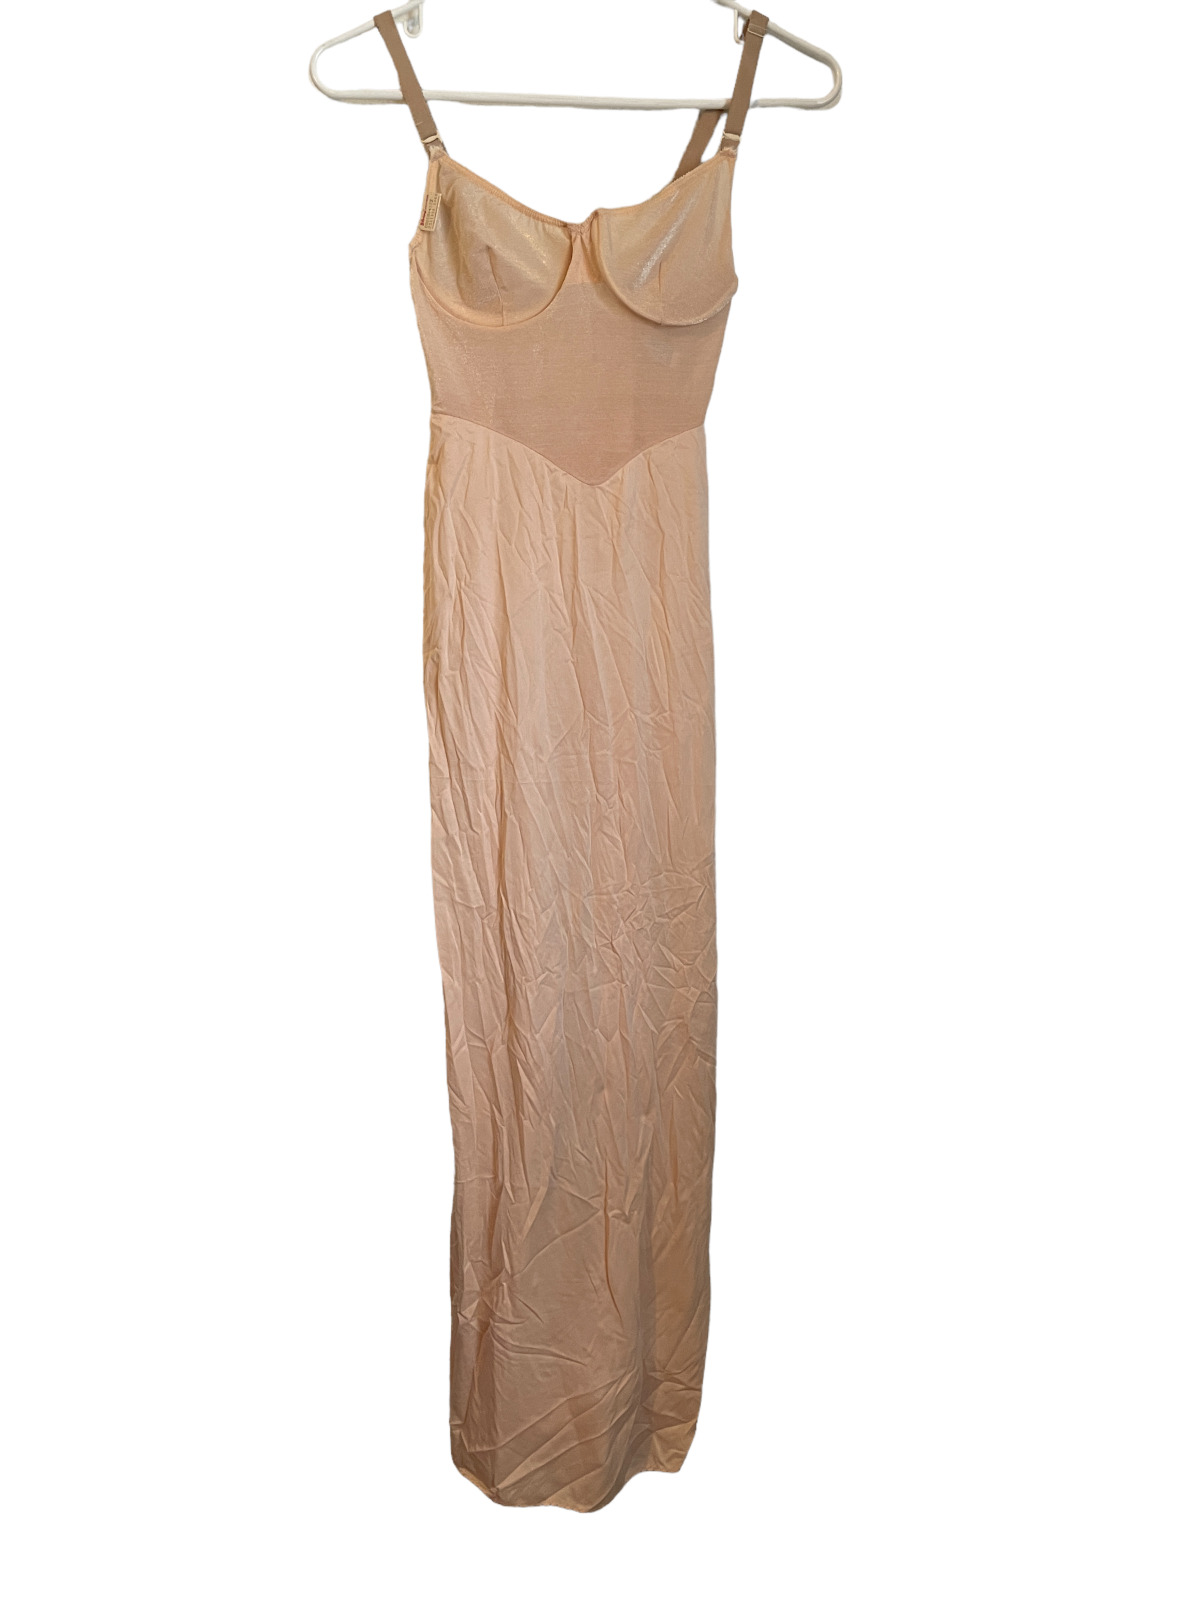 NWT Vintage 70\'s Glydons Hollywood nightgown slip dress underwire 32 Small Beige